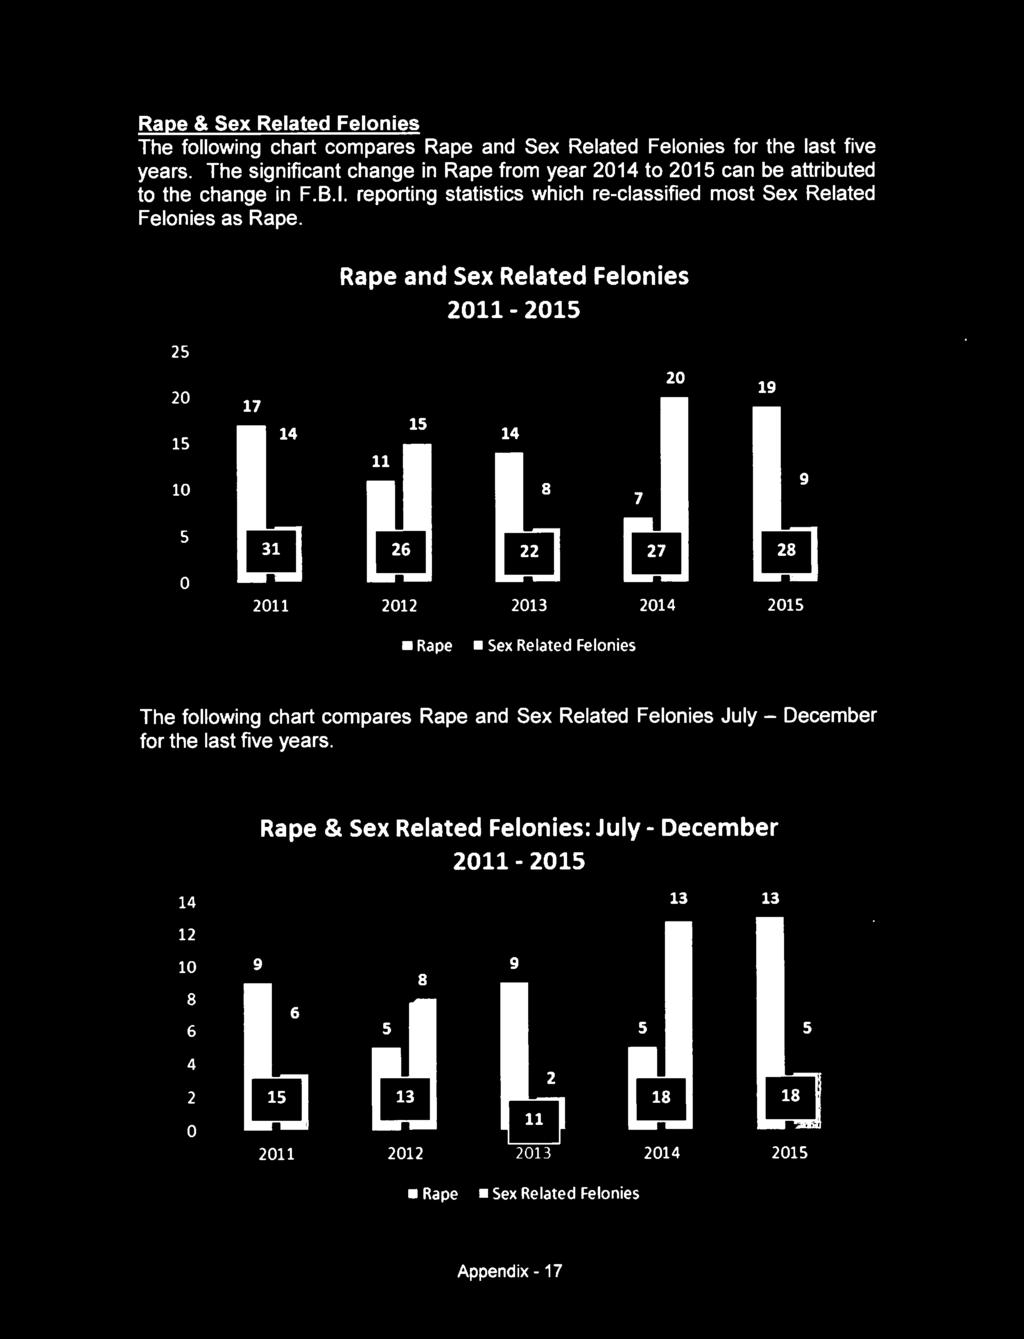 reporting statistics which re-classified most Sex Related Felonies as Rape.